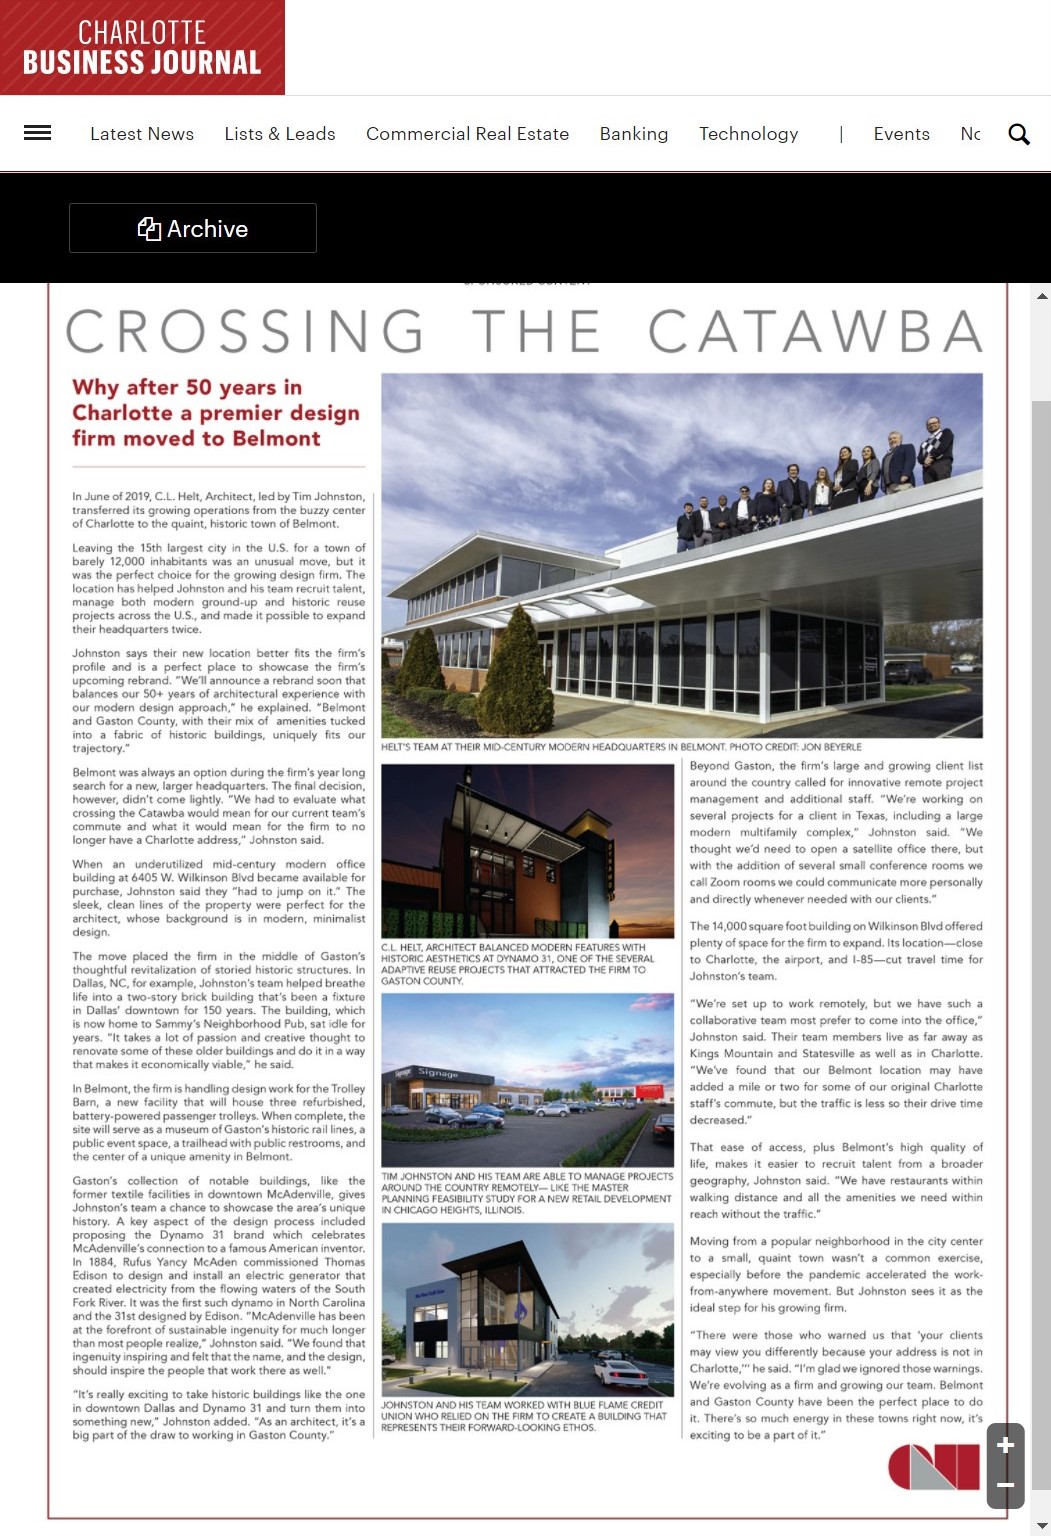 Helt Modern Architecture - Charlotte Business Journal Article - Crossing the Catawba